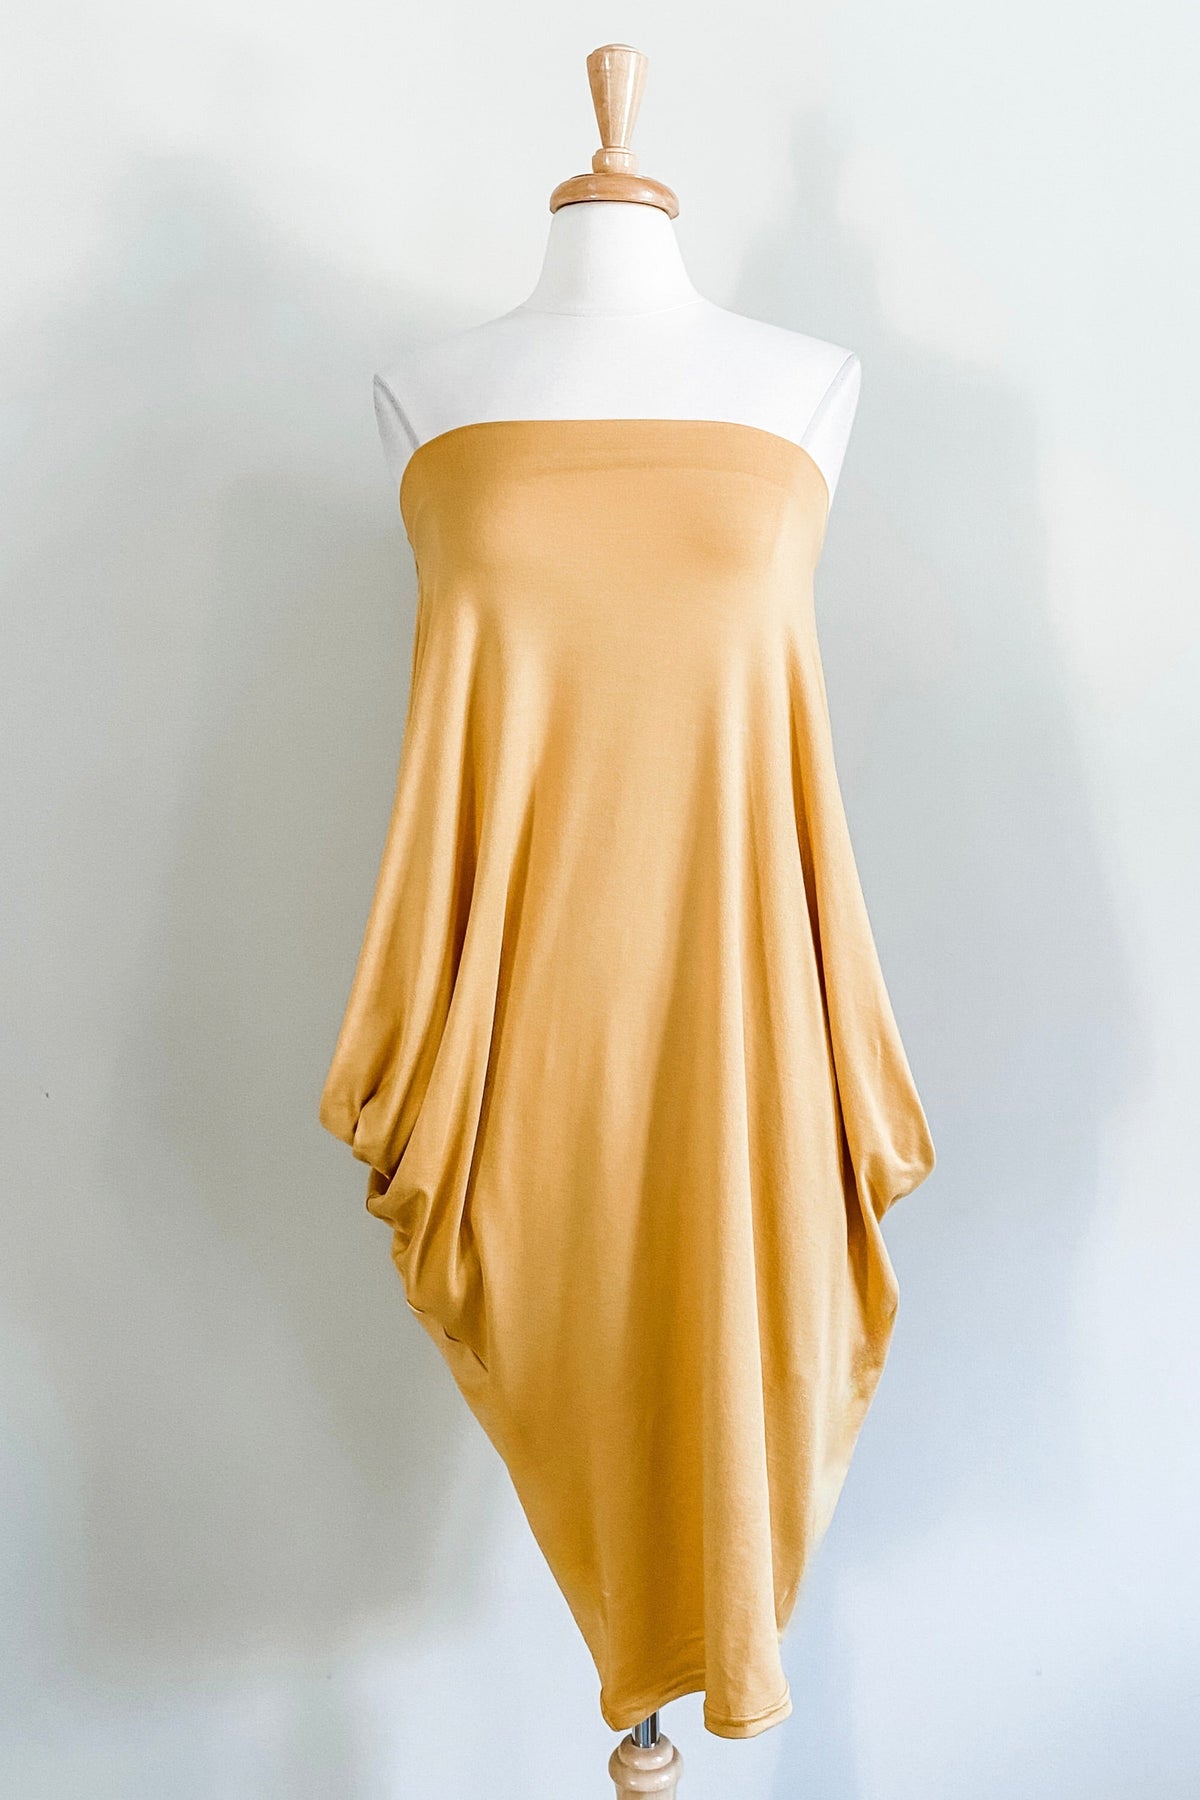 Diane Kroe Origami Dress (Yellow) - The Classic Capsule Collection